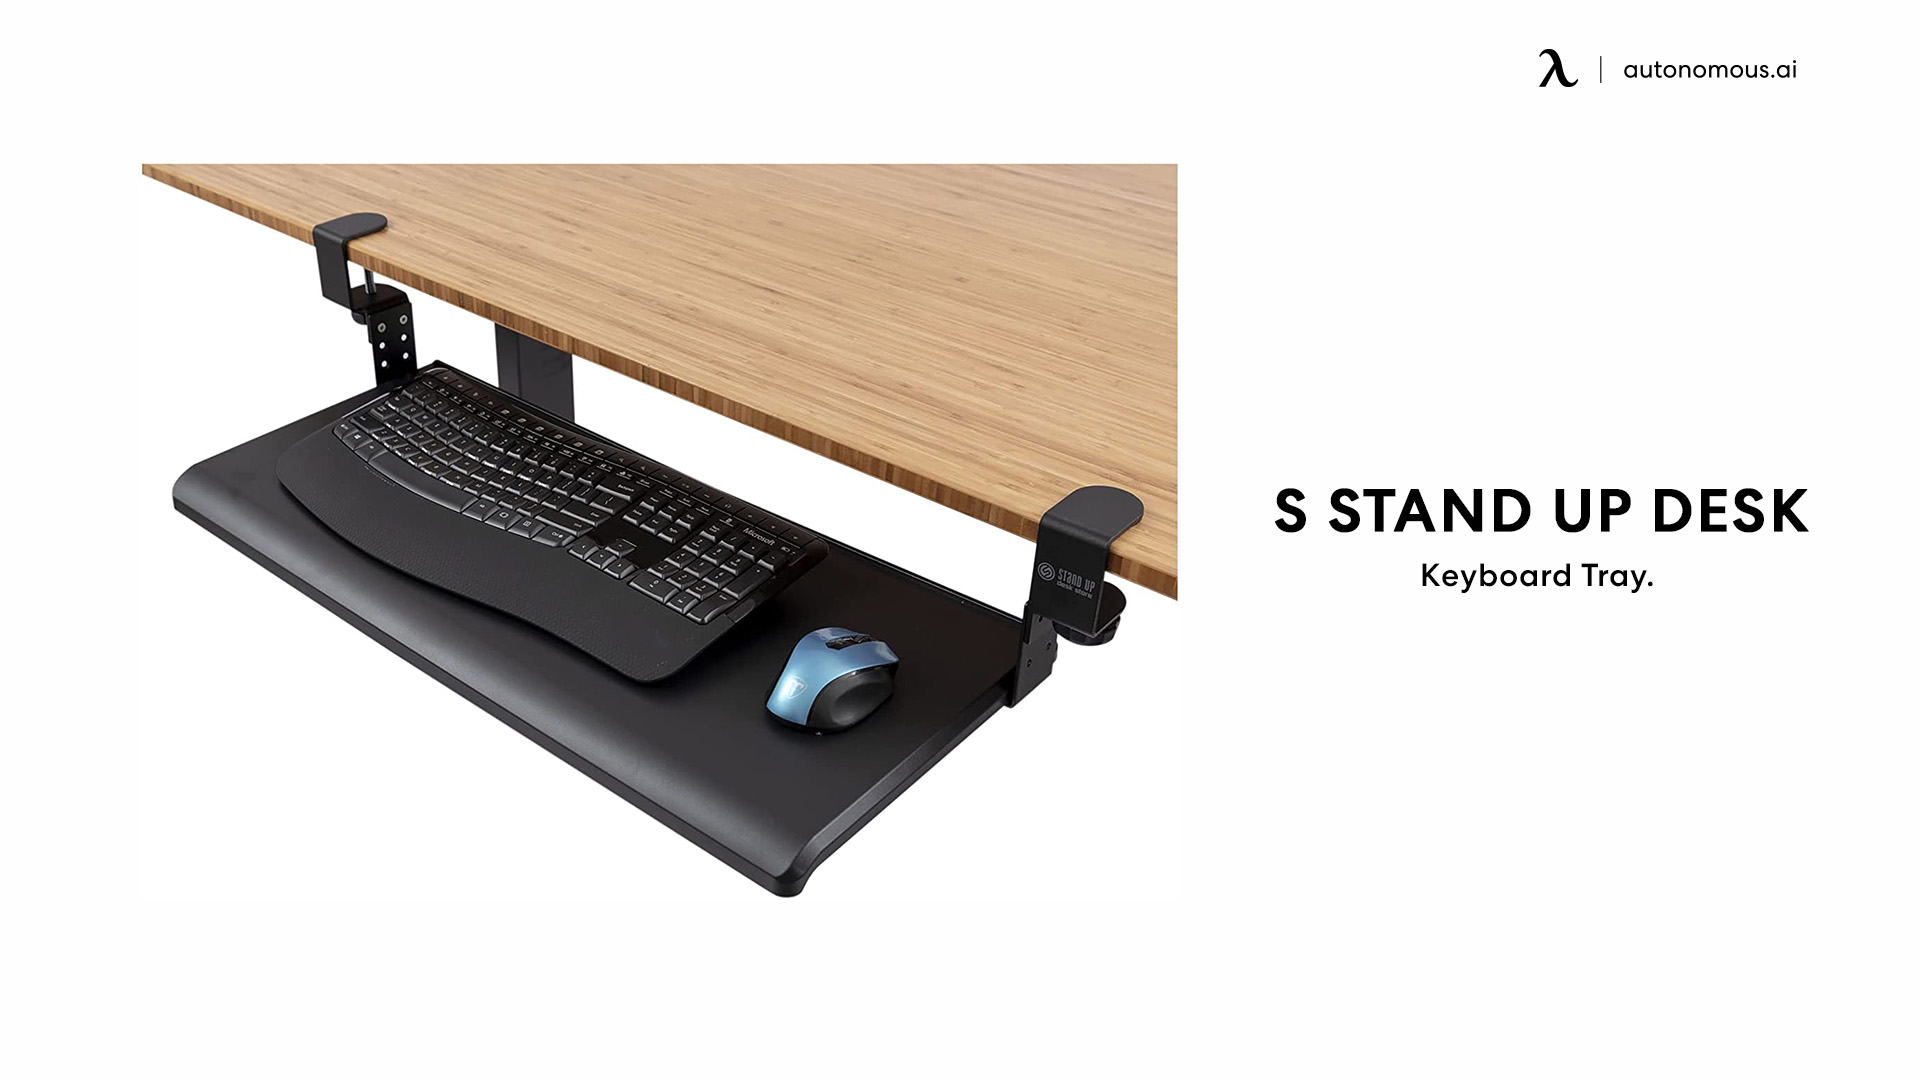 S Stand Up Desk Keyboard Tray